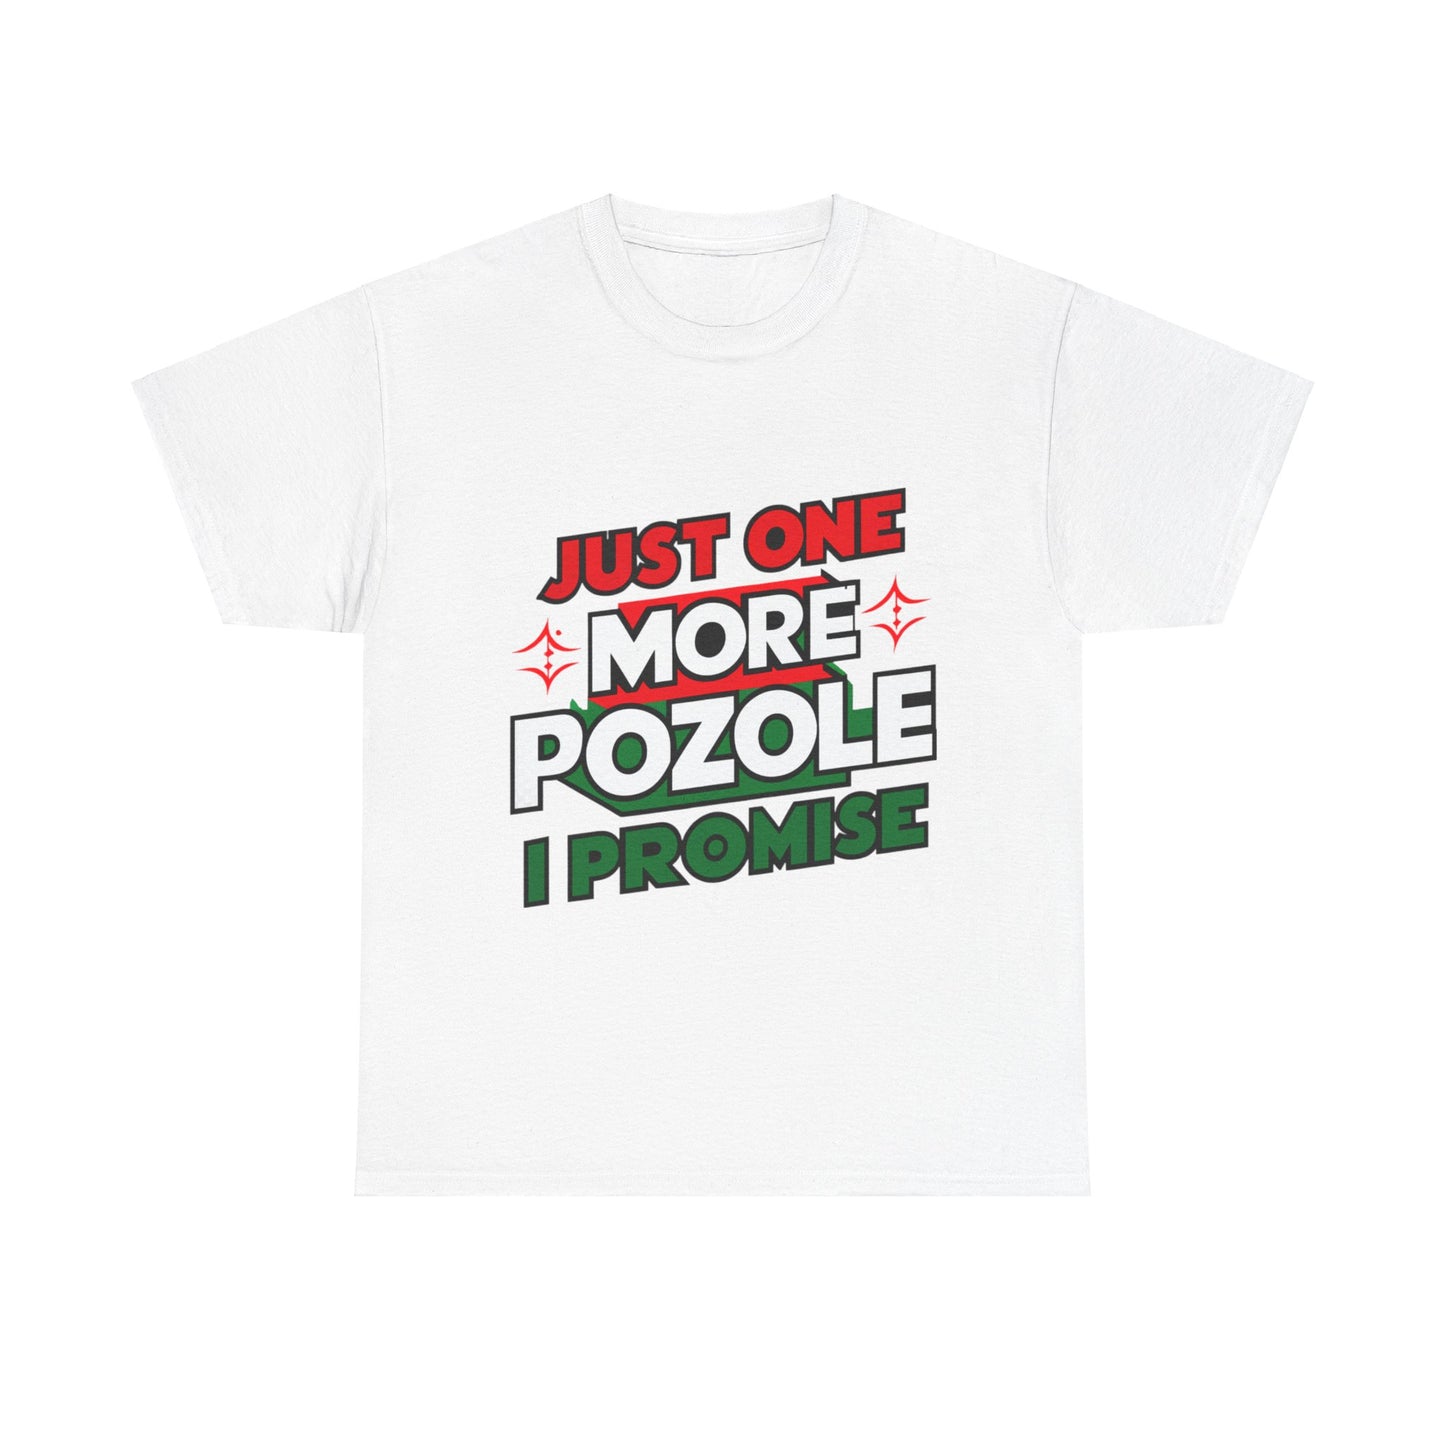 Just One More Pozole I Promise Mexican Food Graphic Unisex Heavy Cotton Tee Cotton Funny Humorous Graphic Soft Premium Unisex Men Women White T-shirt Birthday Gift-10